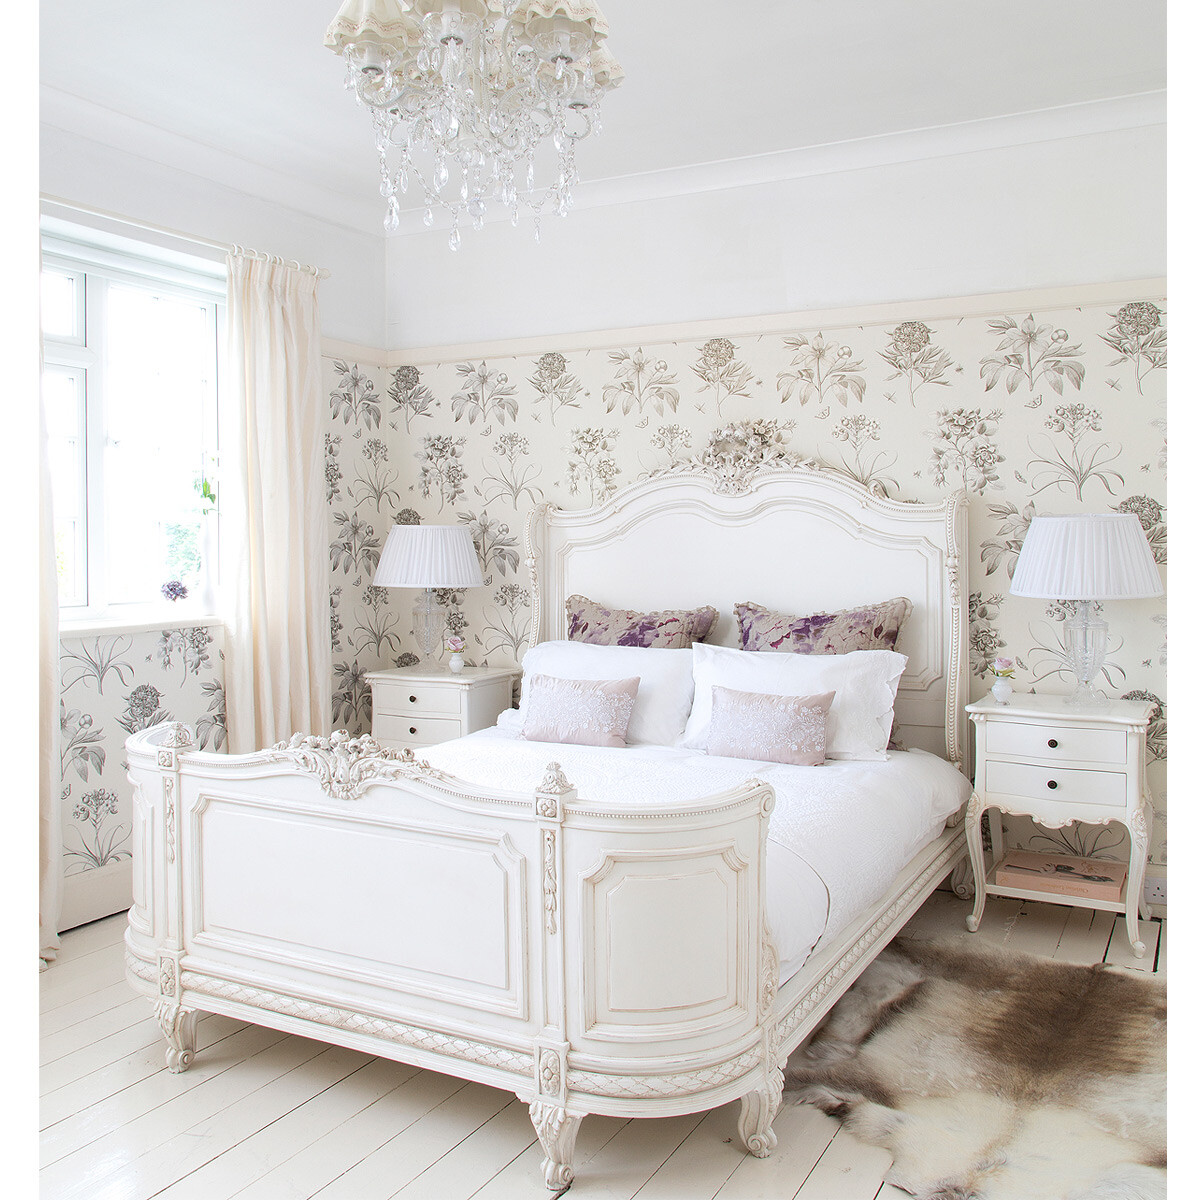 French bed rafinament, elegance and romance in your bedroom